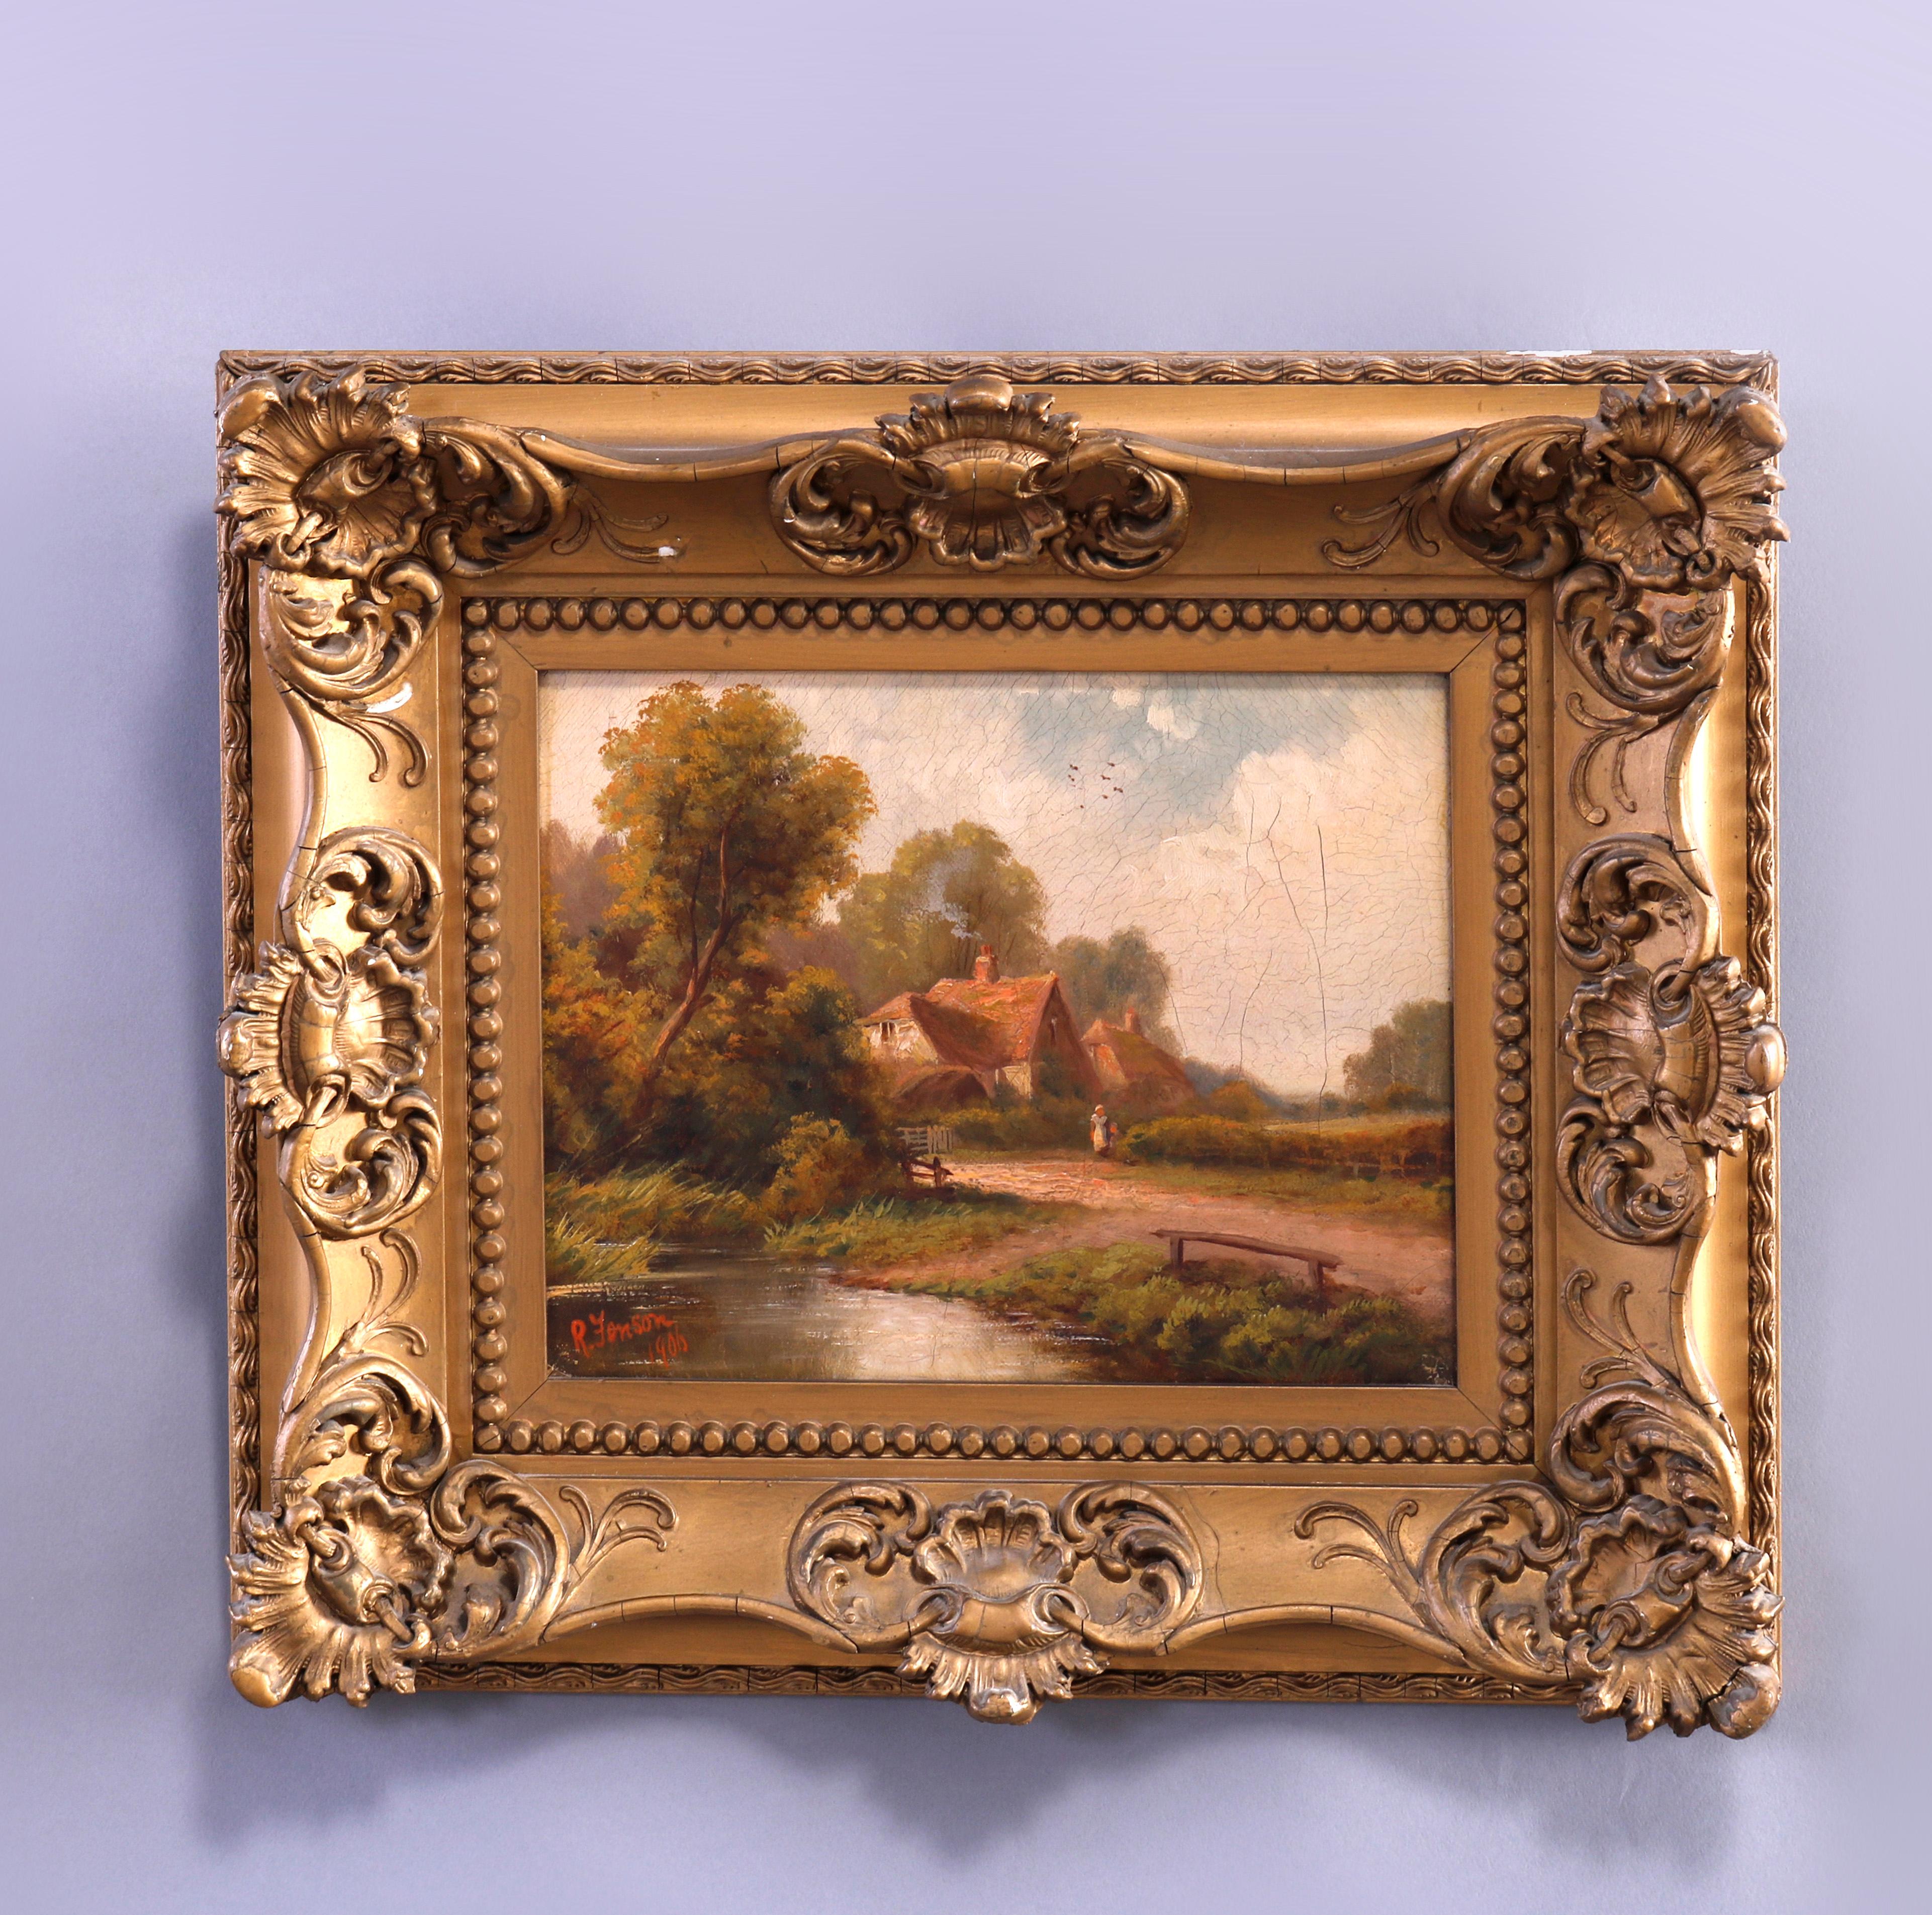 An antique English painting by Robert Fenton offers oil on canvas landscape with Dutch cottage in countryside setting with path, figure and pond, artist signed and dated lower left, seated in giltwood frame

Measures - overall 14.5'' H x 16.25'' W